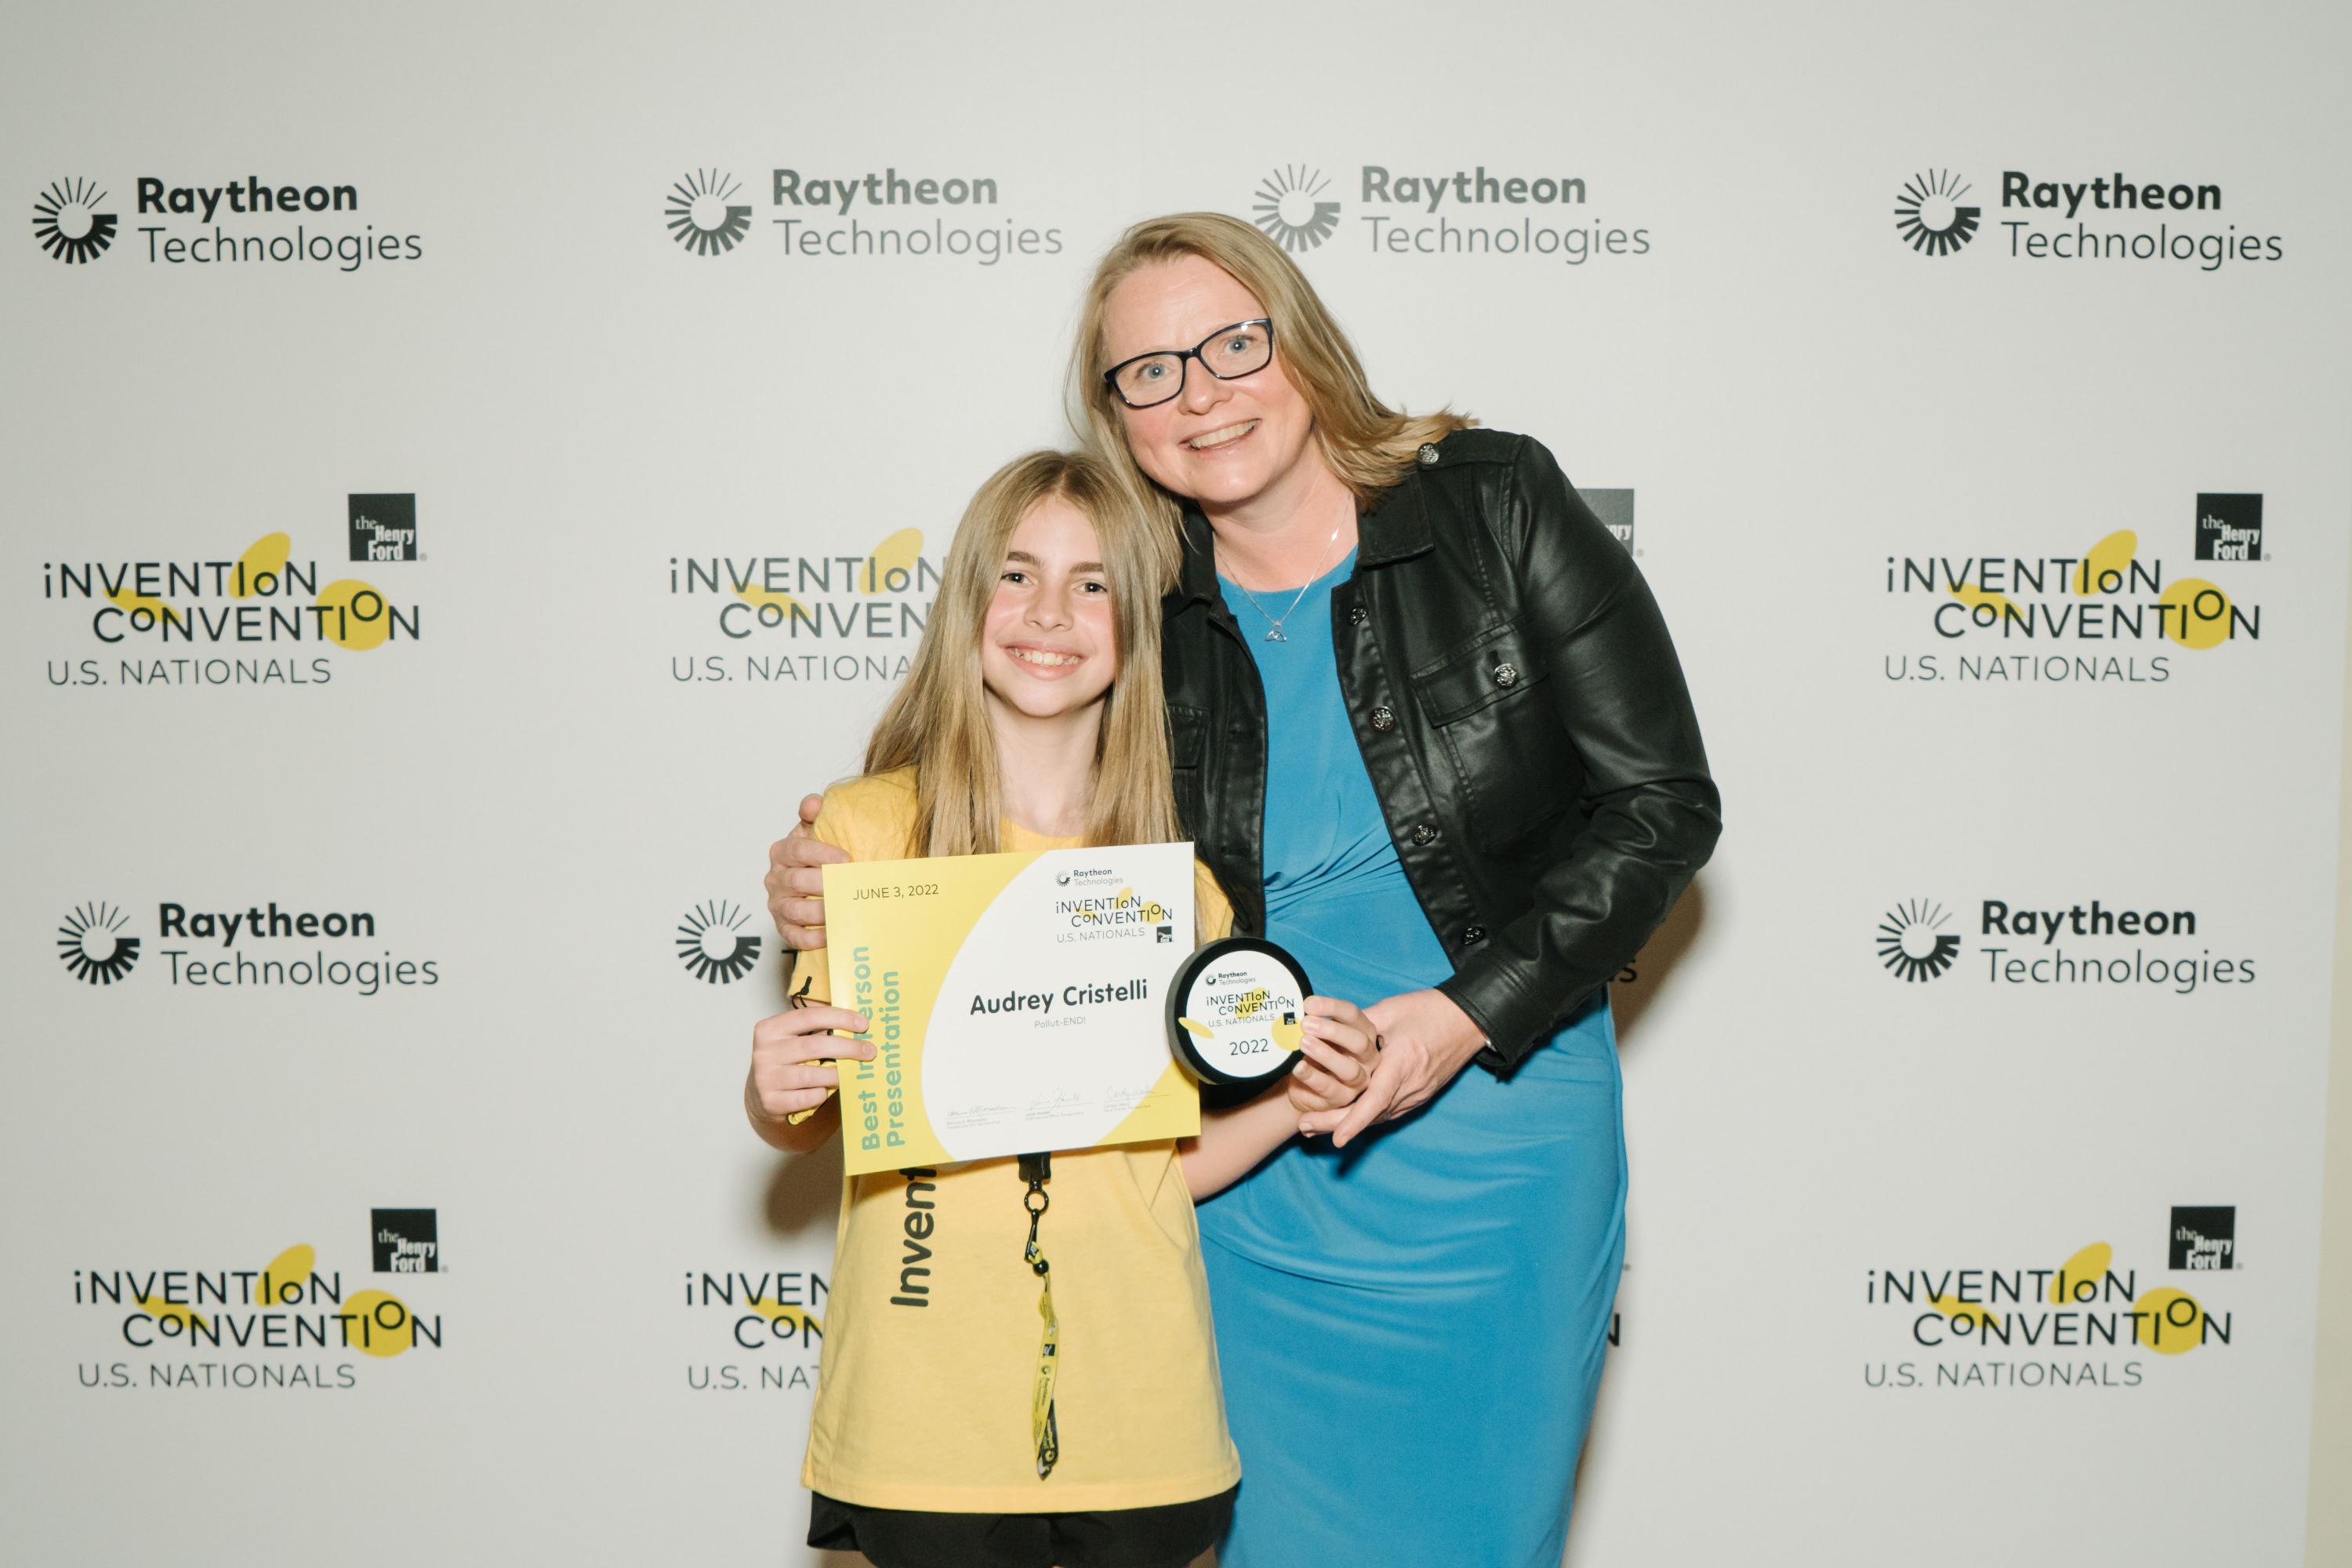 Audrey Cristelli of Team Pollut-END with Lucie Howell, Chief Learning Officer of The Henry Ford Museum of American Innovation at the 2022 Raytheon Technologies Invention Convention U.S. Nationals held at the museum in spring.